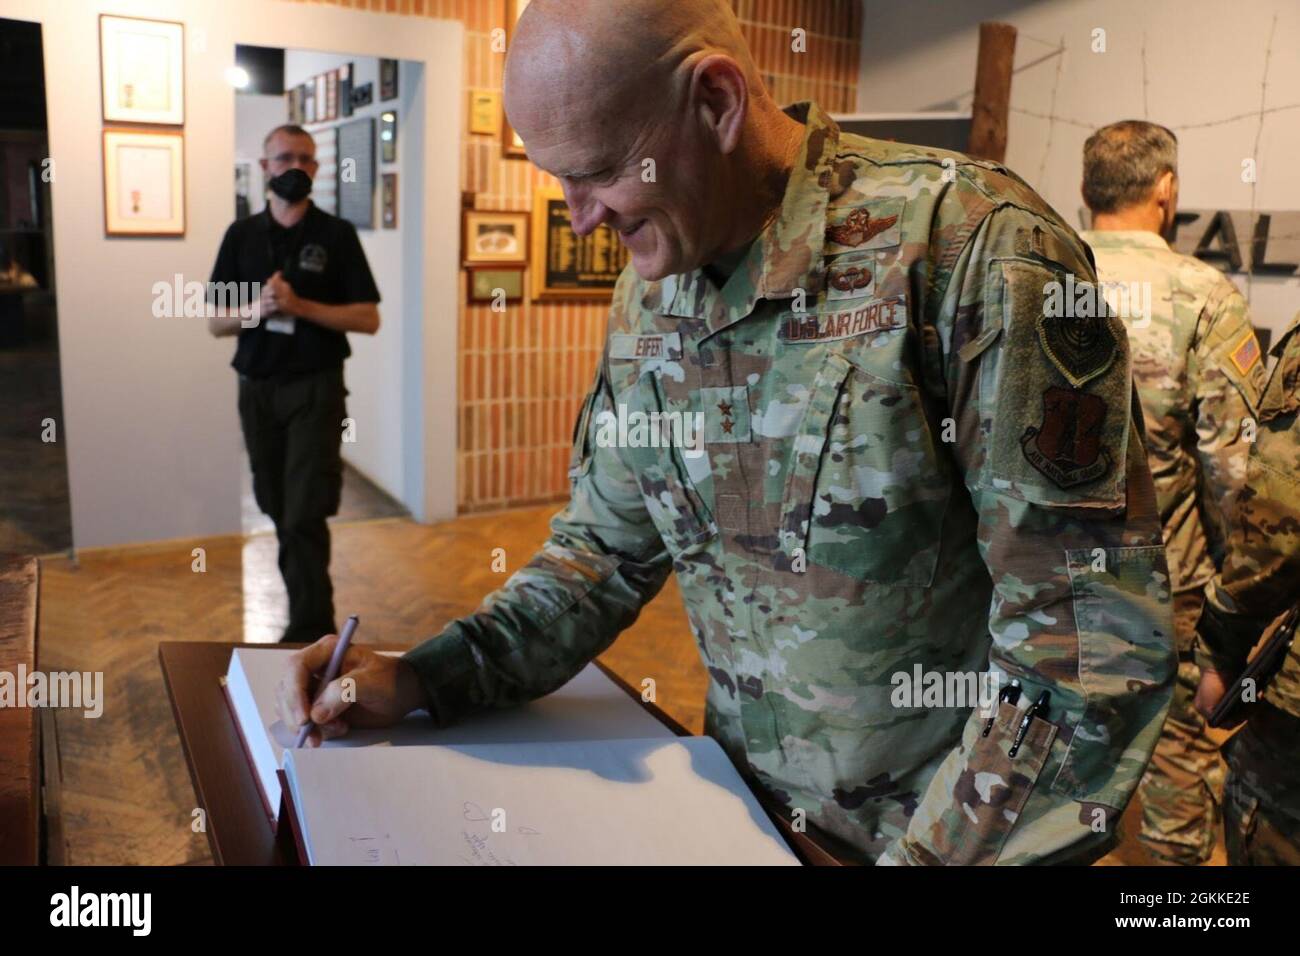 Air Force Maj. Gen. James Eifert (right), Florida National Guard adjutant general, signs the guest book while touring the Prisoner of War Camps Museum at the site of Stalag Luft III during a command visit to soldiers deployed with the 50th Regional Support Group (RSG) in Zagan, Poland, on May 16, 2021. This museum preserves the memory of the “Great Escape” of 1944 during World War II. The plan for the “Great Escape” called for a maximum of 200 Allied prisoners of war to break free from Stalag Luft III, but only 76 airmen escaped, and of those, only three avoided recapture by German forces. Stock Photo